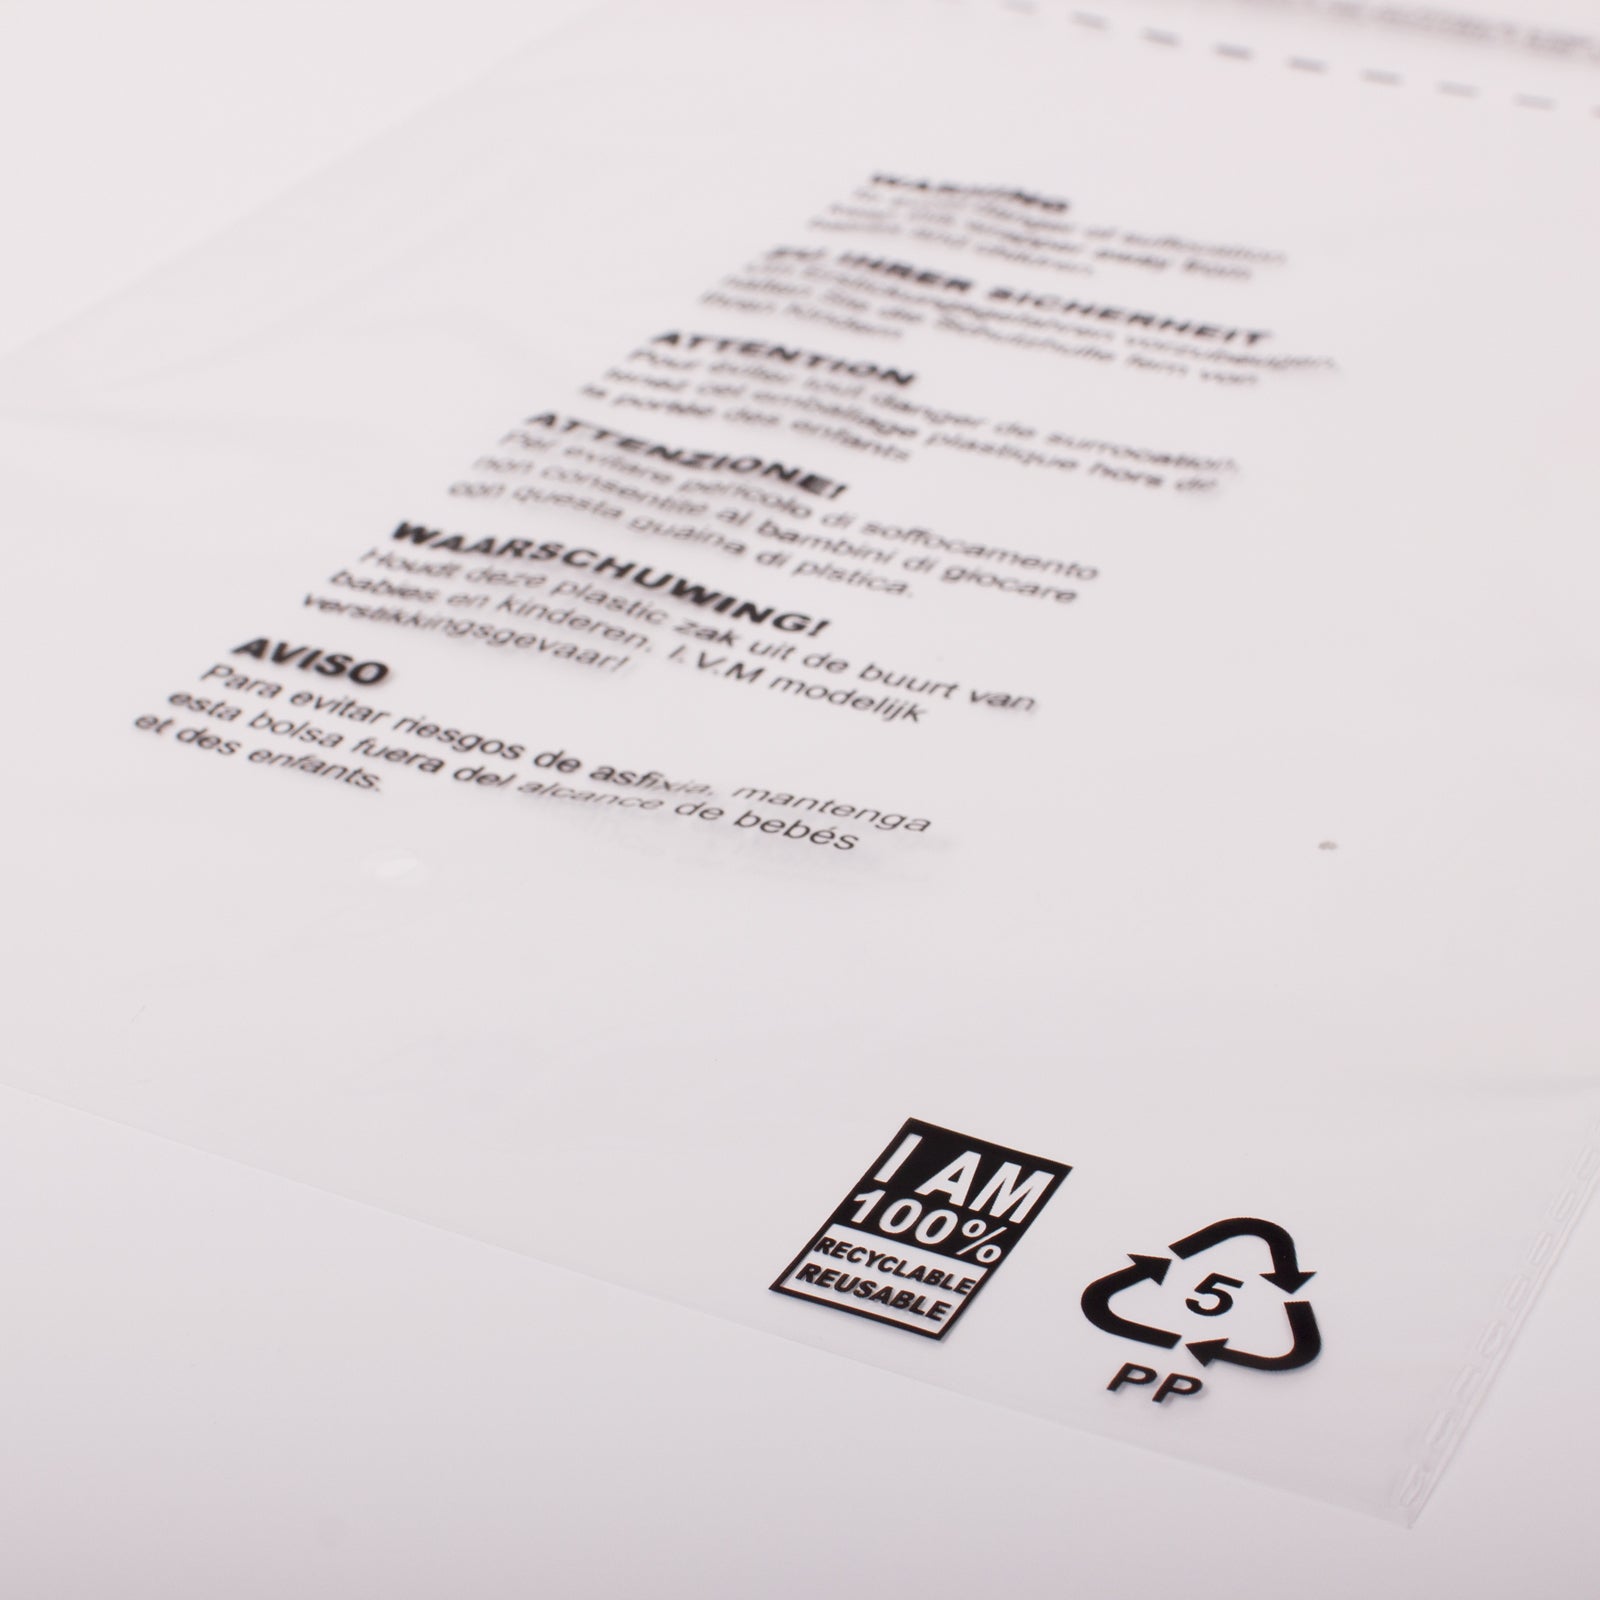 8 x 10 Clear Mailing Bag with 'I AM 100% RECYCLABLE'